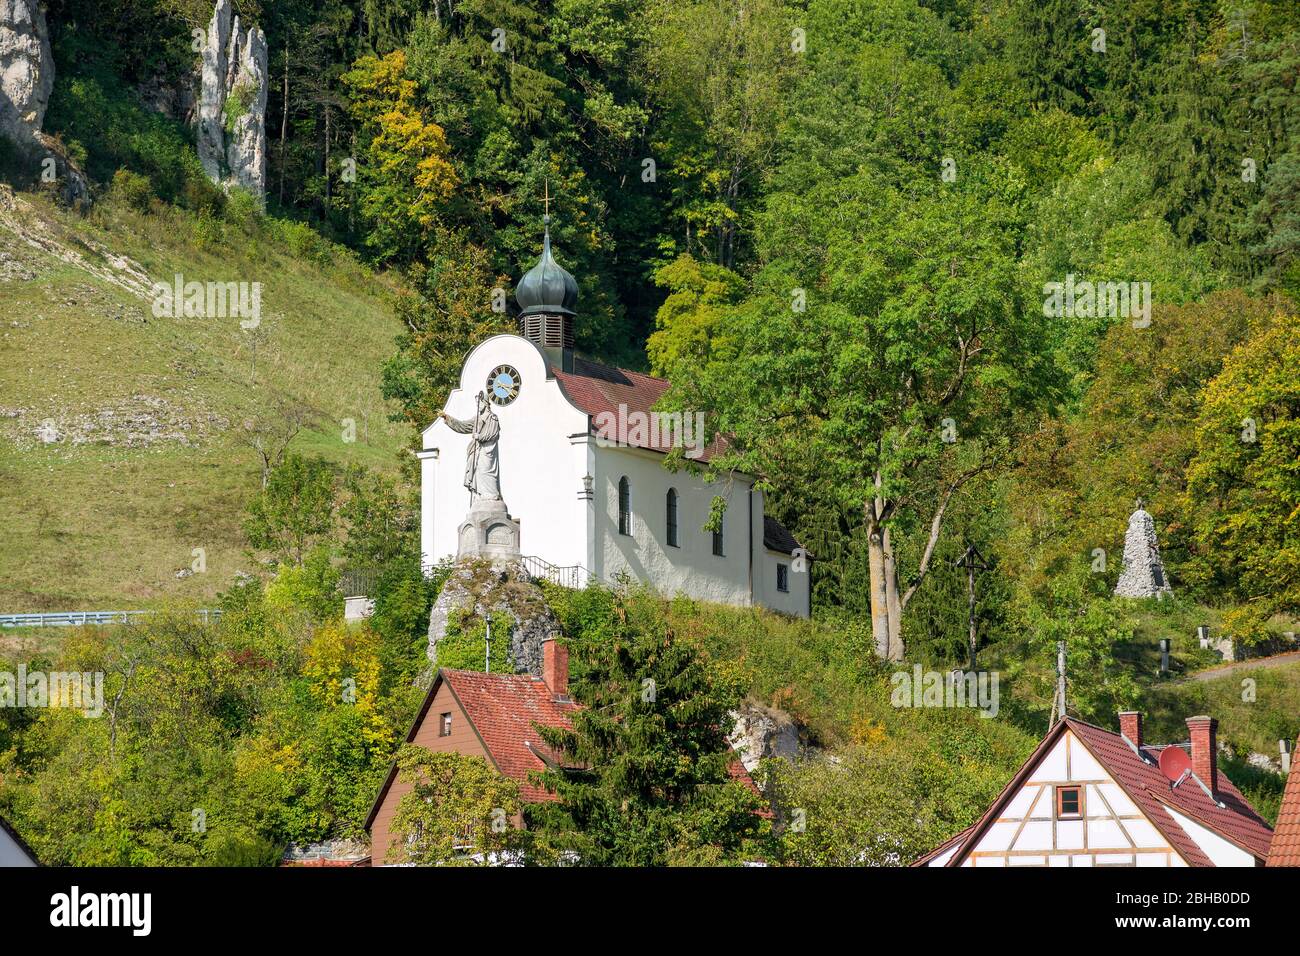 Germany, Baden-Württemberg, Schelklingen - Huts, view from the bottom of the valley to the 1717/19 built 'Chapel to the painful Mother of God' with the statue of the 'Good Shepherd' Stock Photo